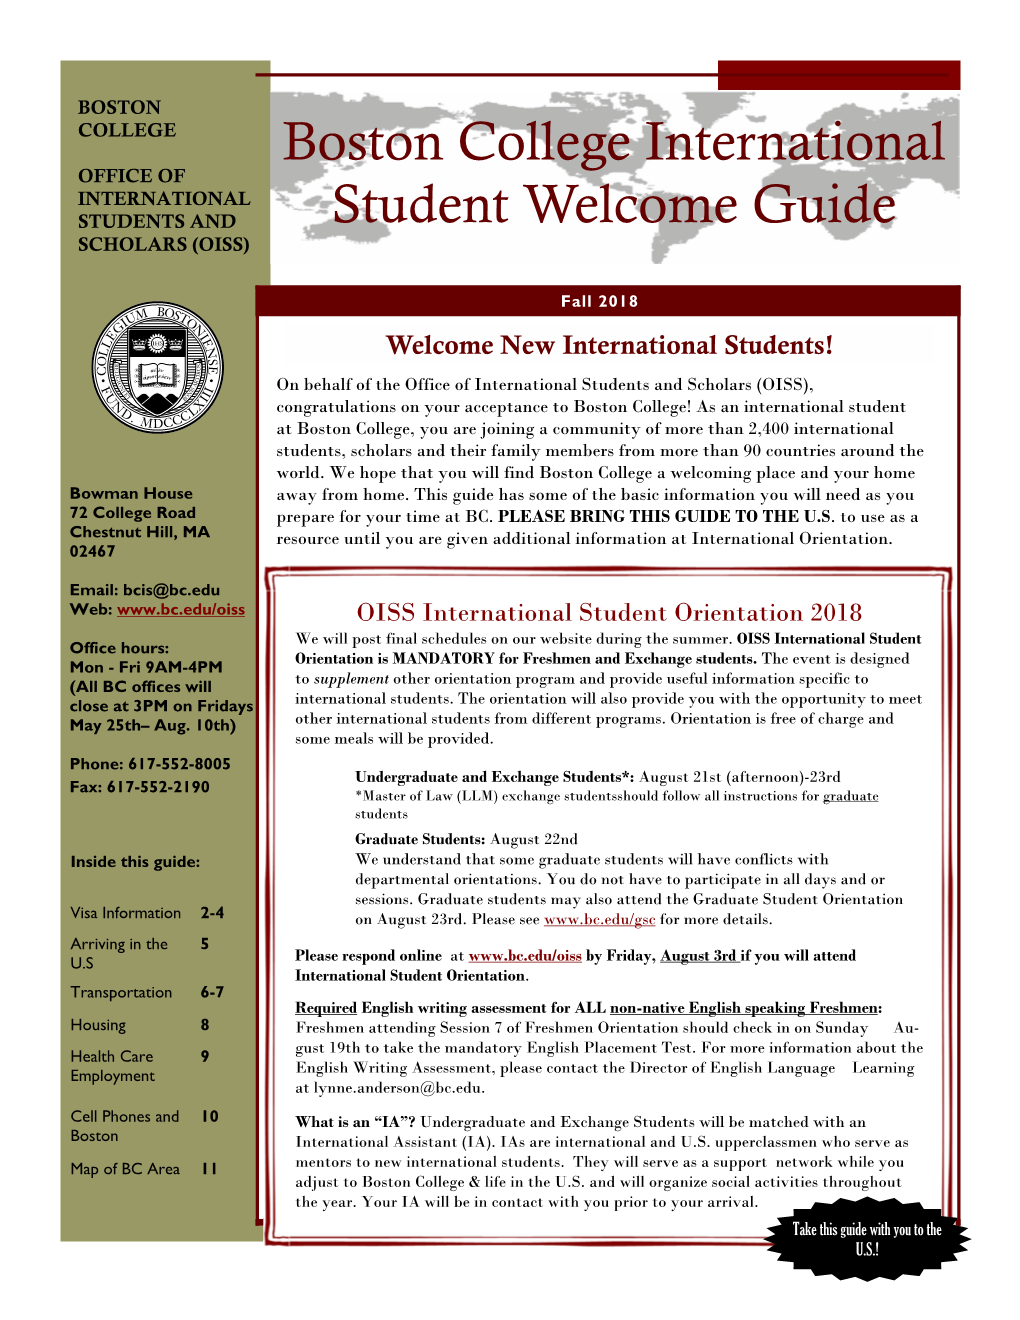 Welcome-Guide Fall 2018.Pub